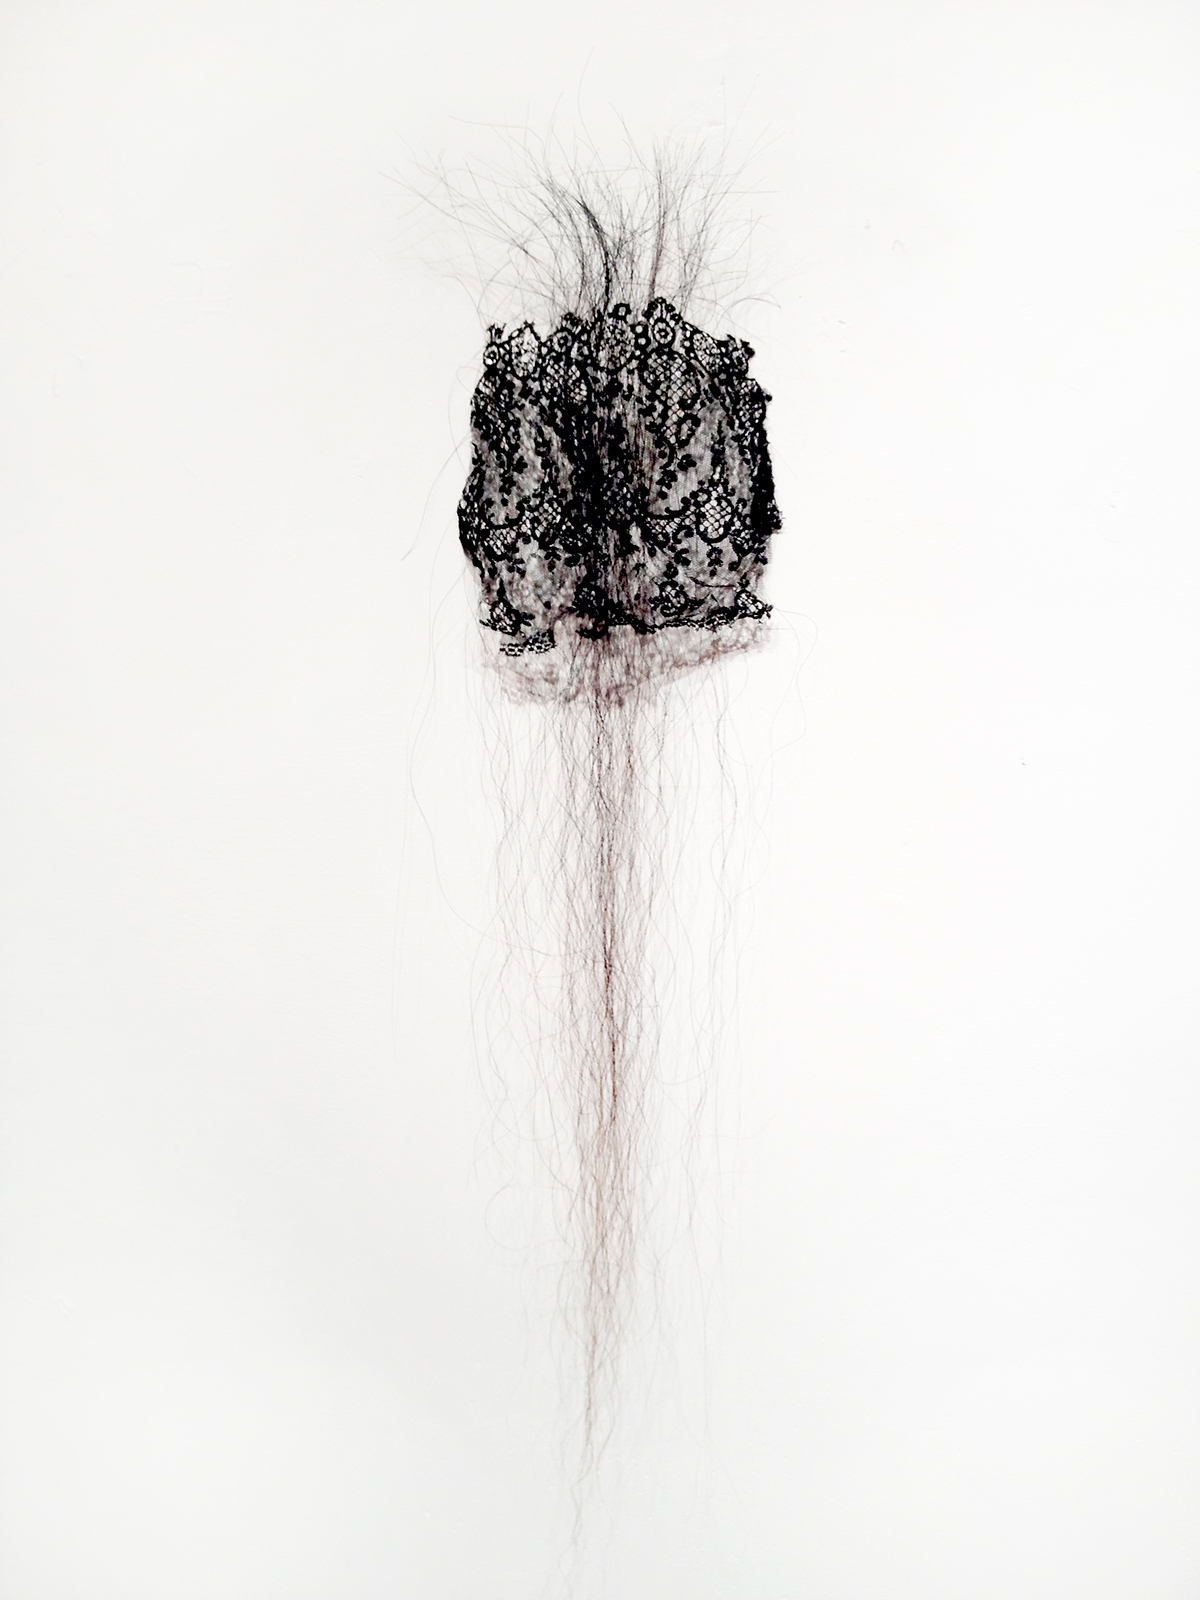 virginia woolf Embroidery horsehair lace Veil mourning cycles Crone installation Performance